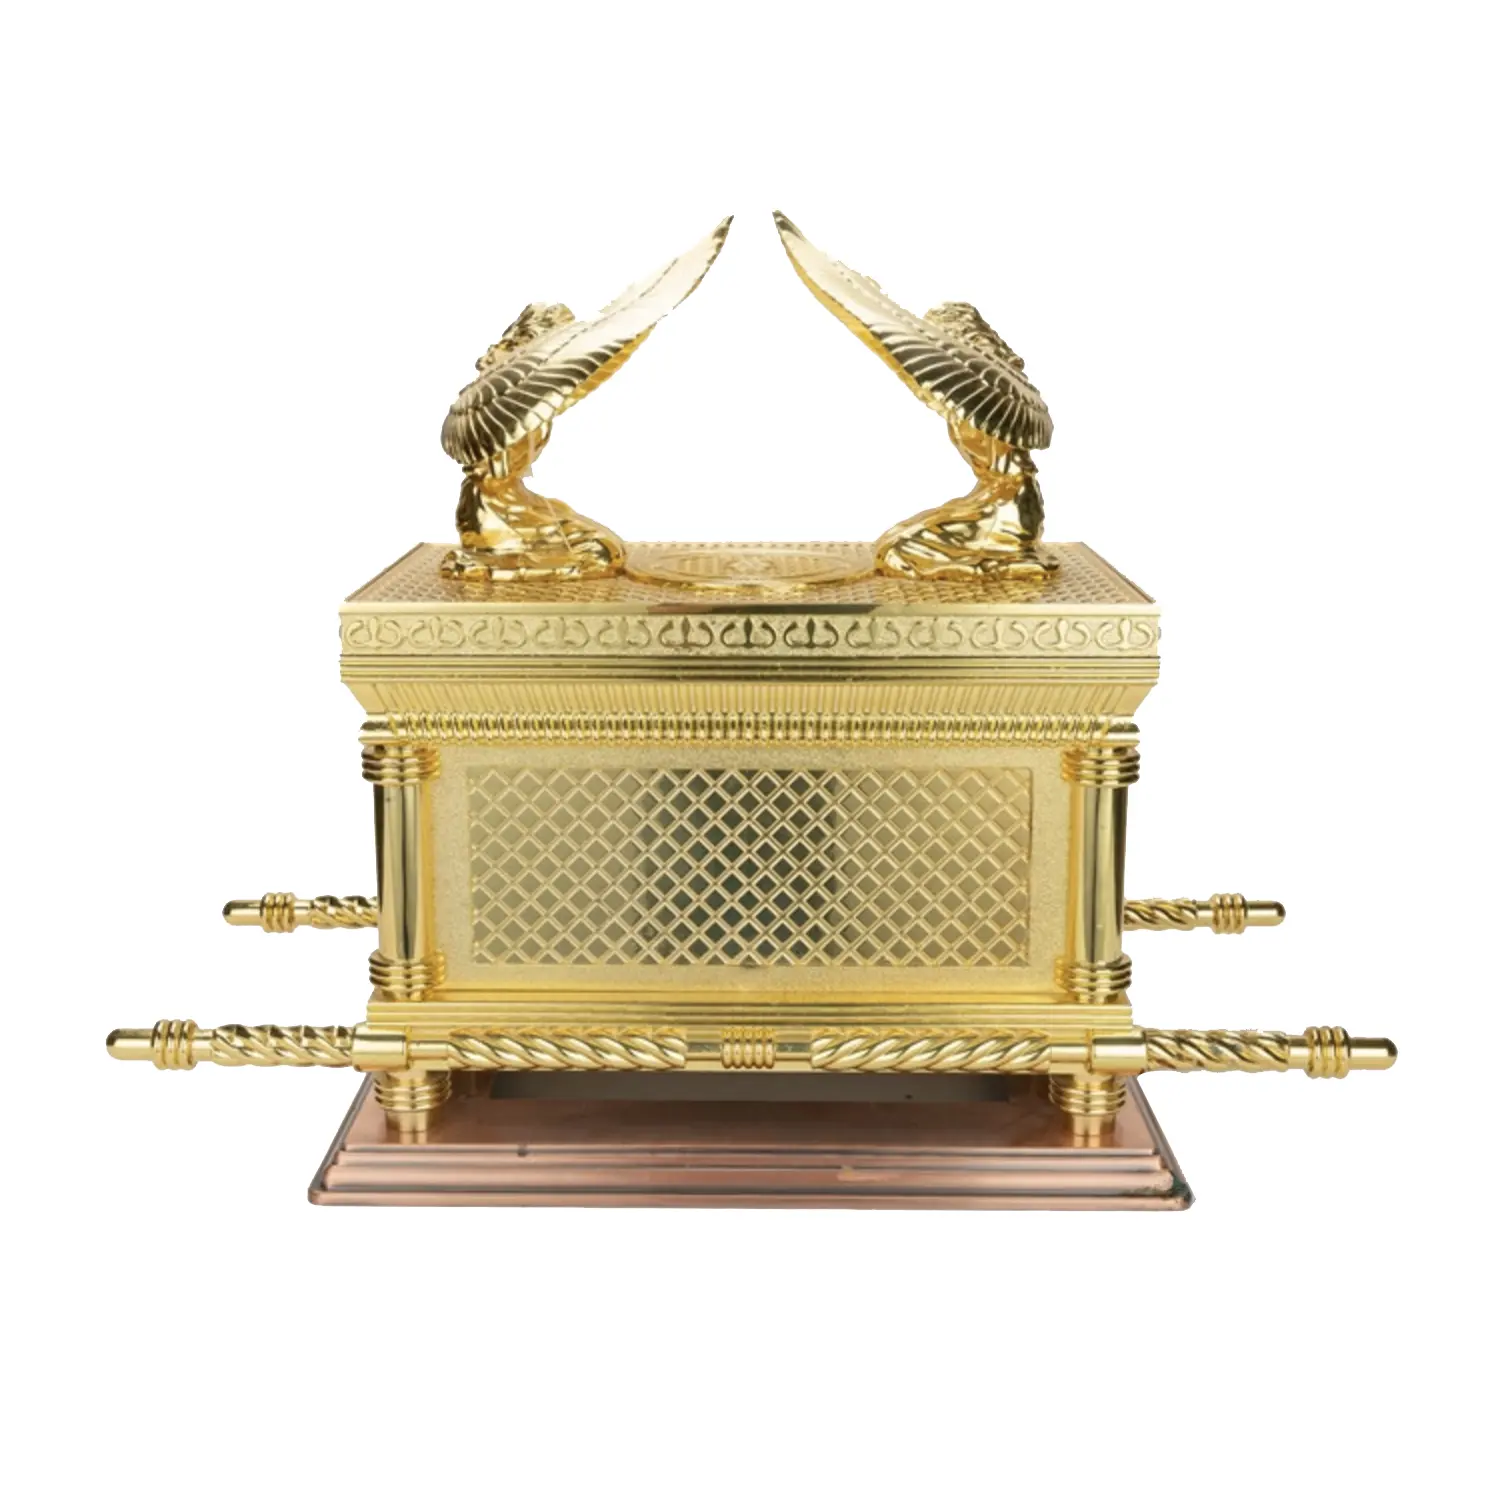 Judaica Gold Ark of the Covenant Testimony Copper Base 20" Large Size